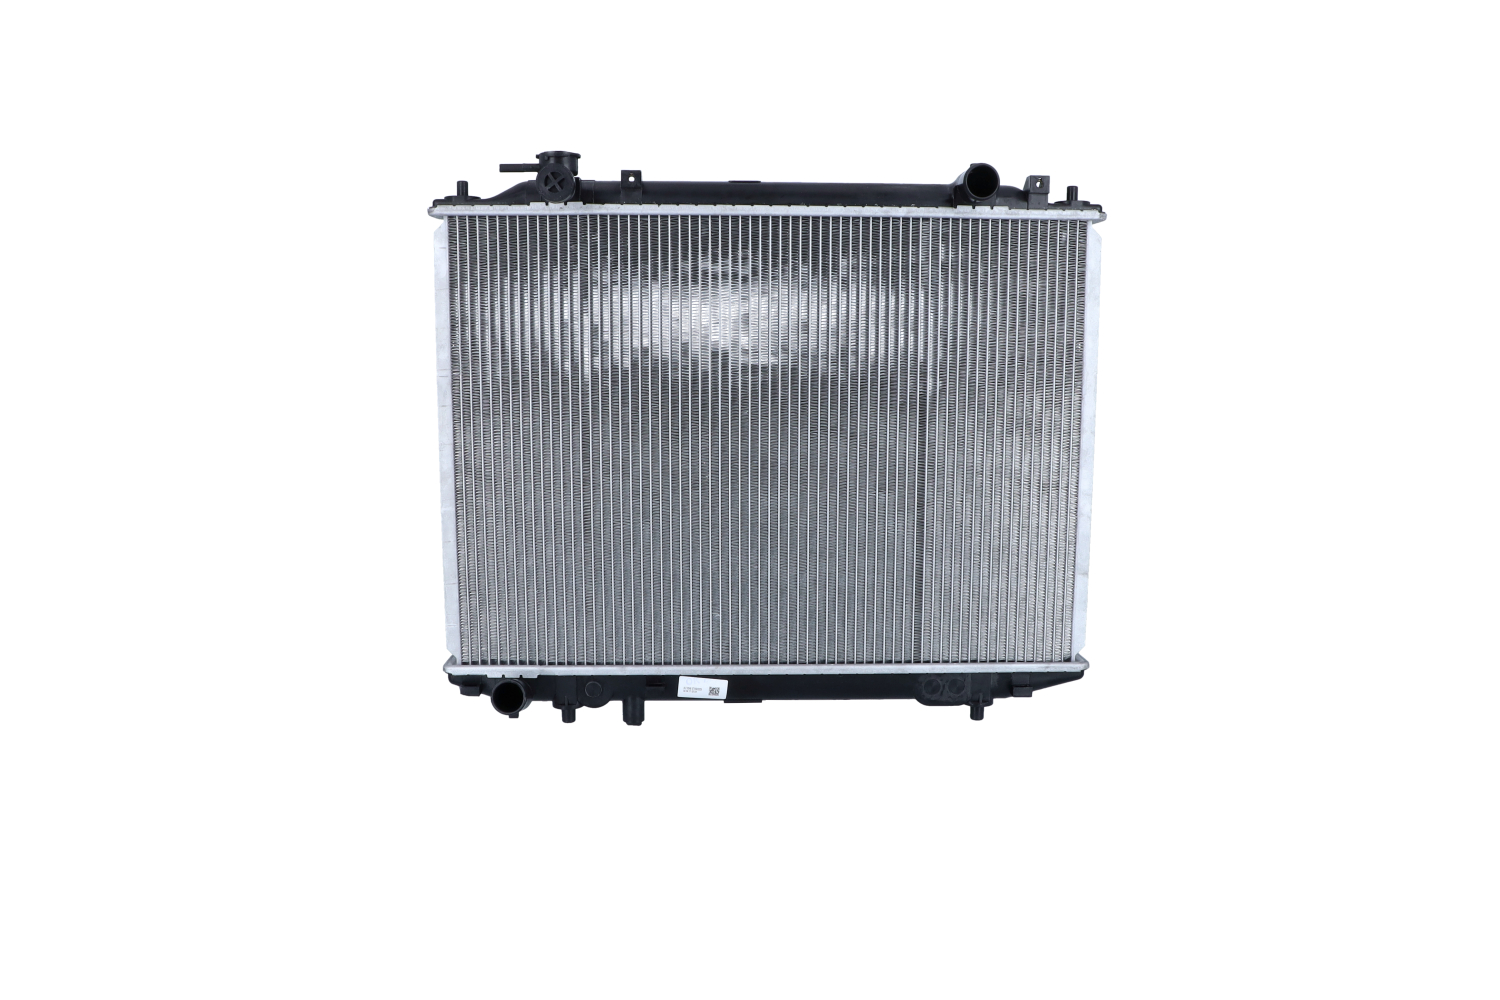 NRF 53567 Engine radiator Aluminium, 635 x 450 x 33 mm, with mounting parts, Brazed cooling fins